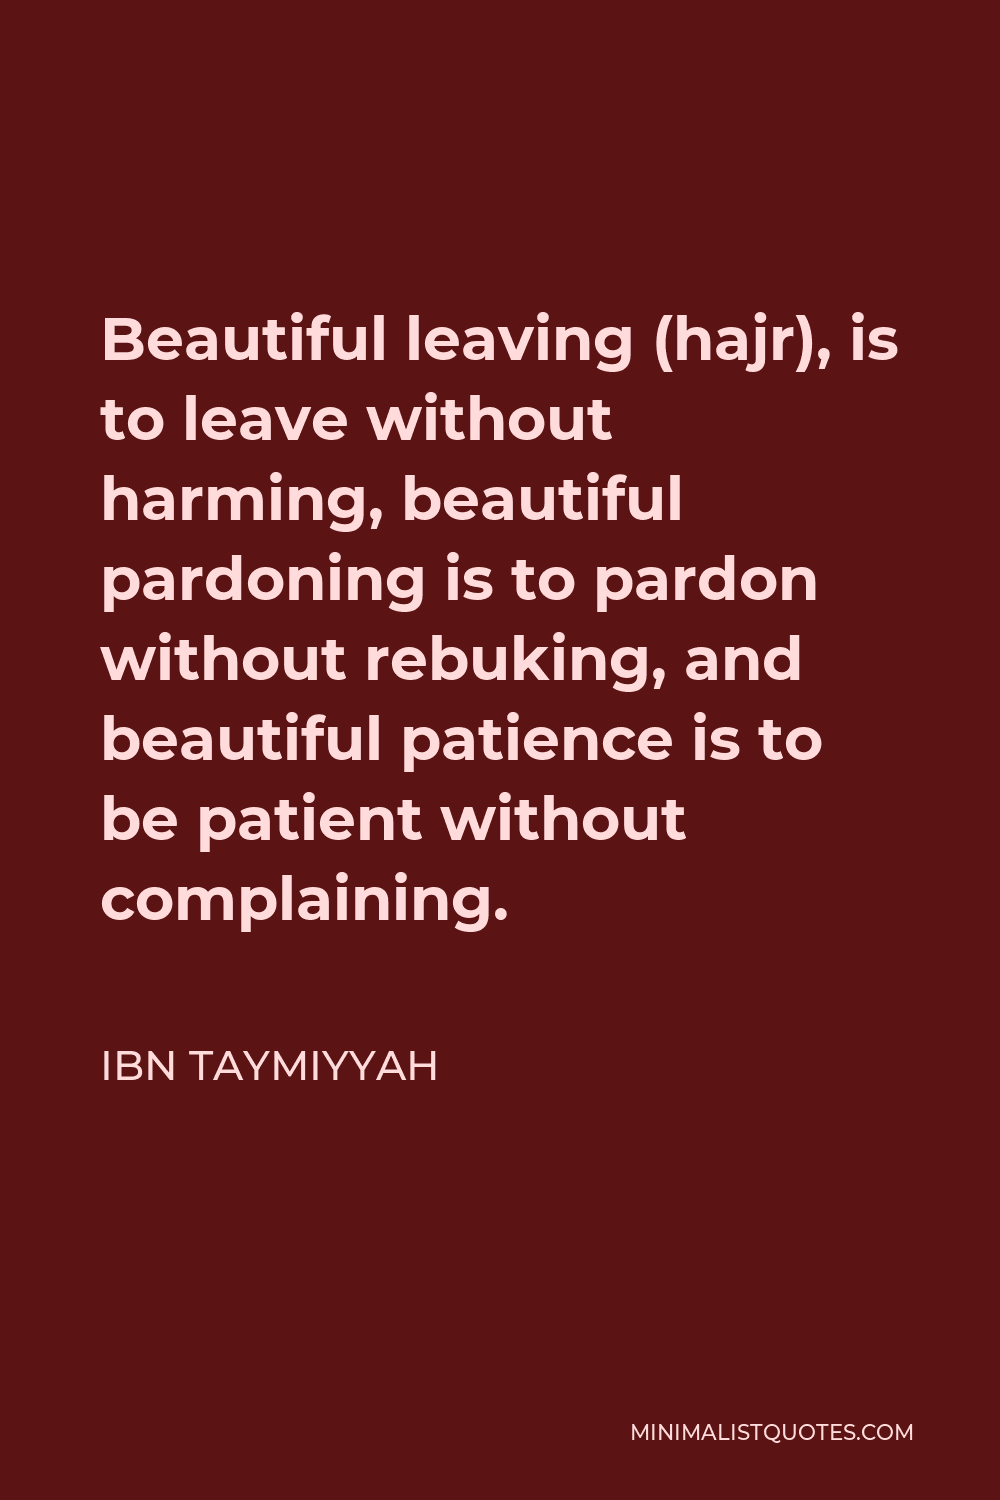 Ibn Taymiyyah Quote - Beautiful leaving (hajr), is to leave without harming, beautiful pardoning is to pardon without rebuking, and beautiful patience is to be patient without complaining.